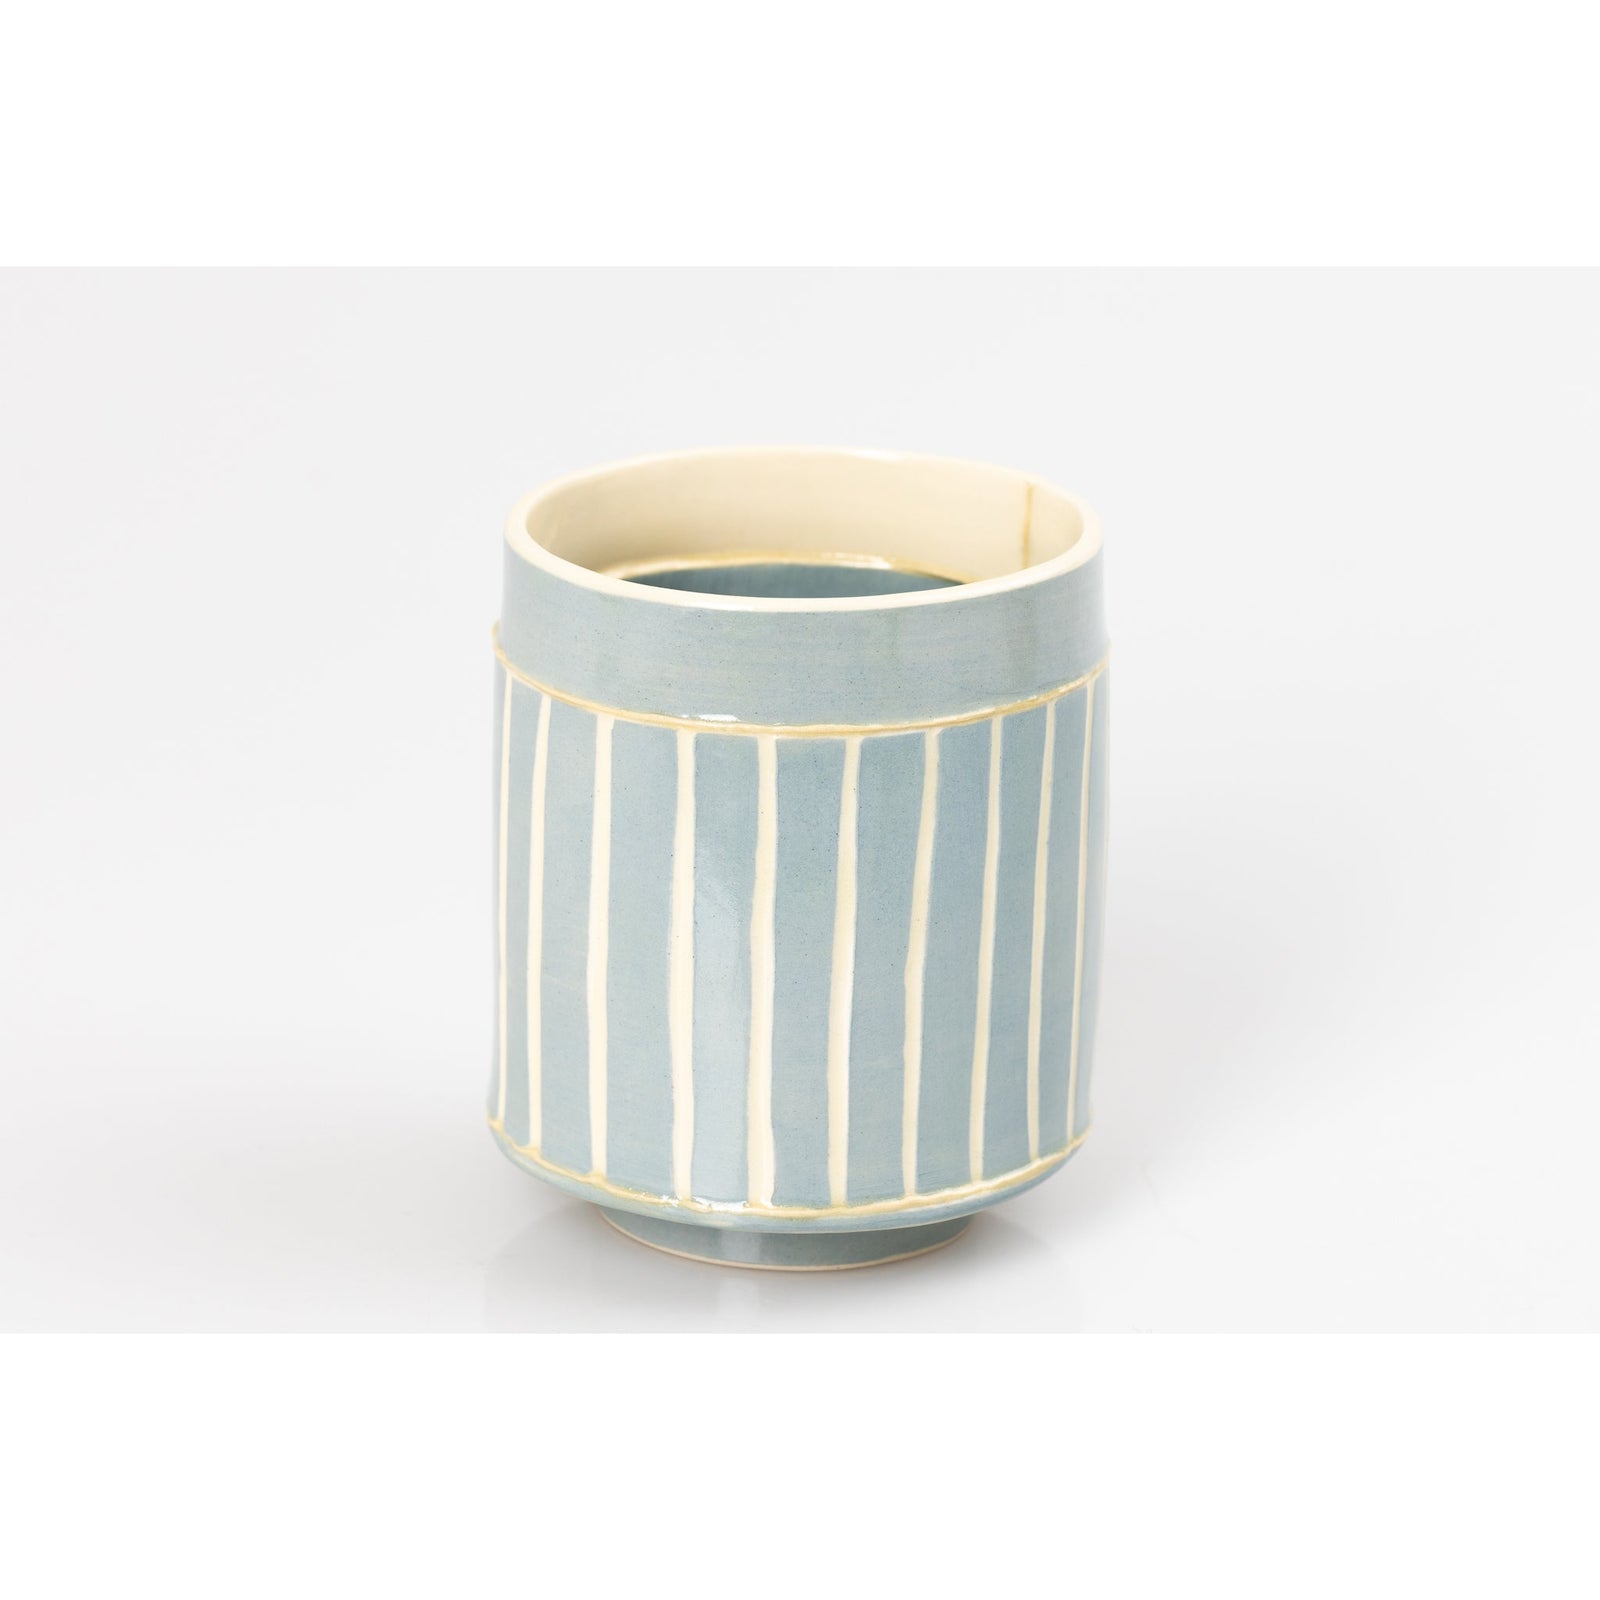 SV13 Small Vessel, handbuilt ceramic created by Emily-Kriste Wilcox, available from Padstow Gallery, Cornwall